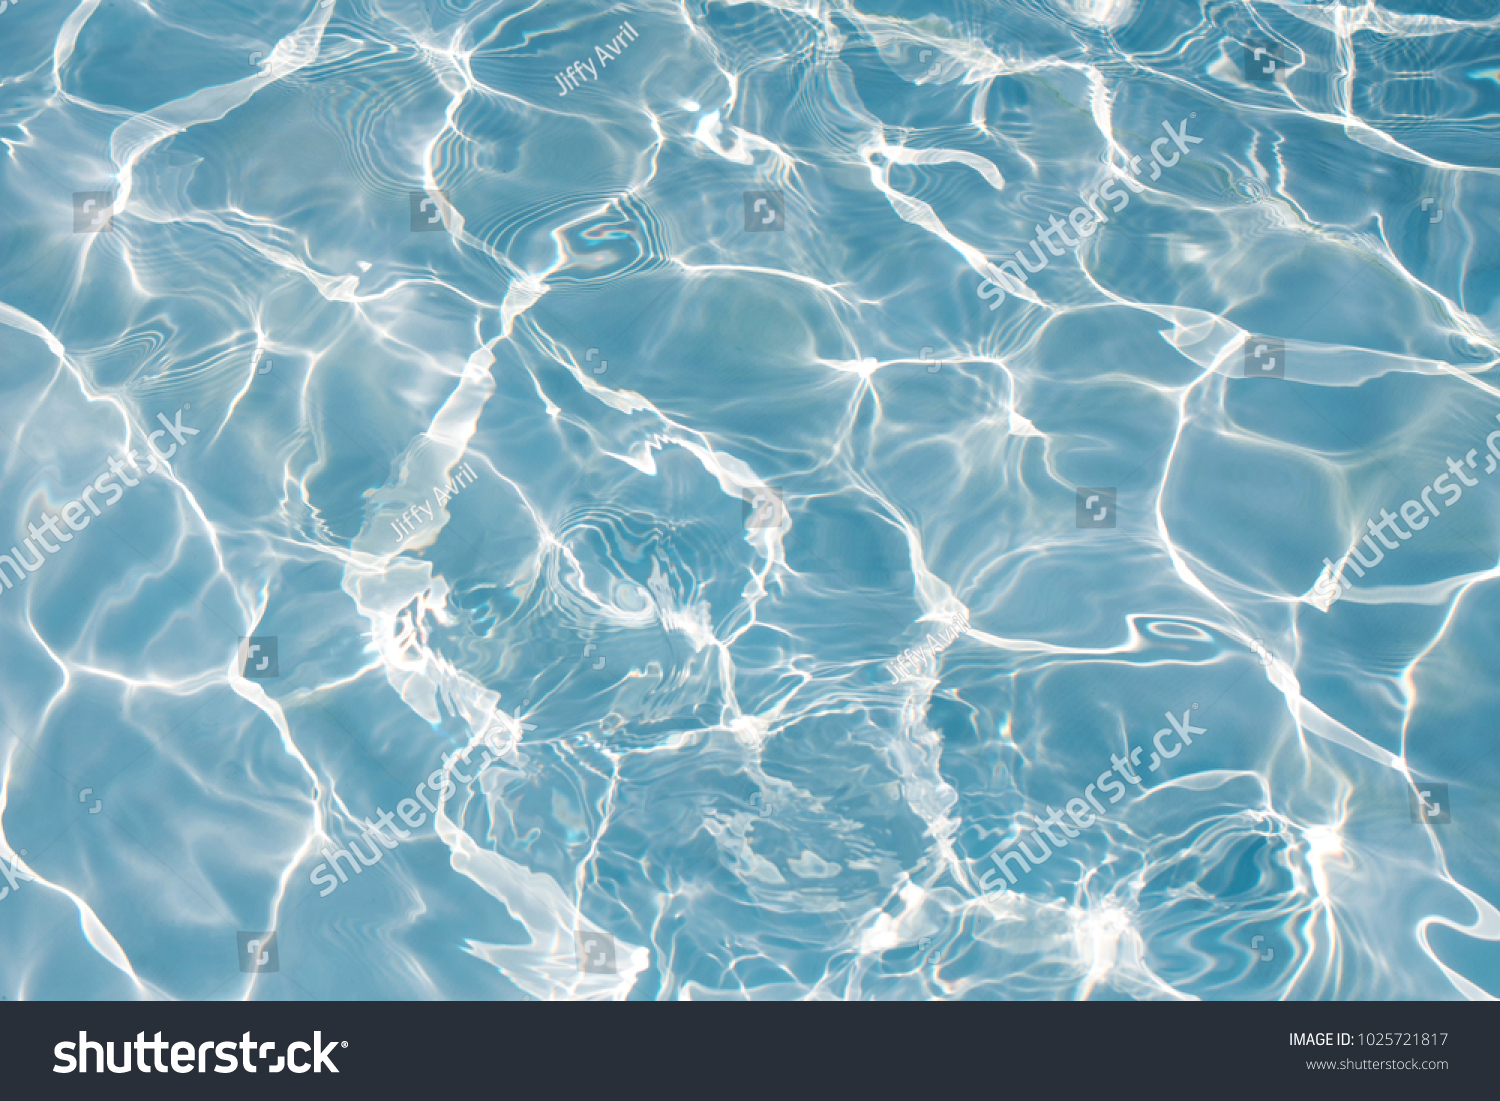 Texture of water in swimming pool for background #1025721817